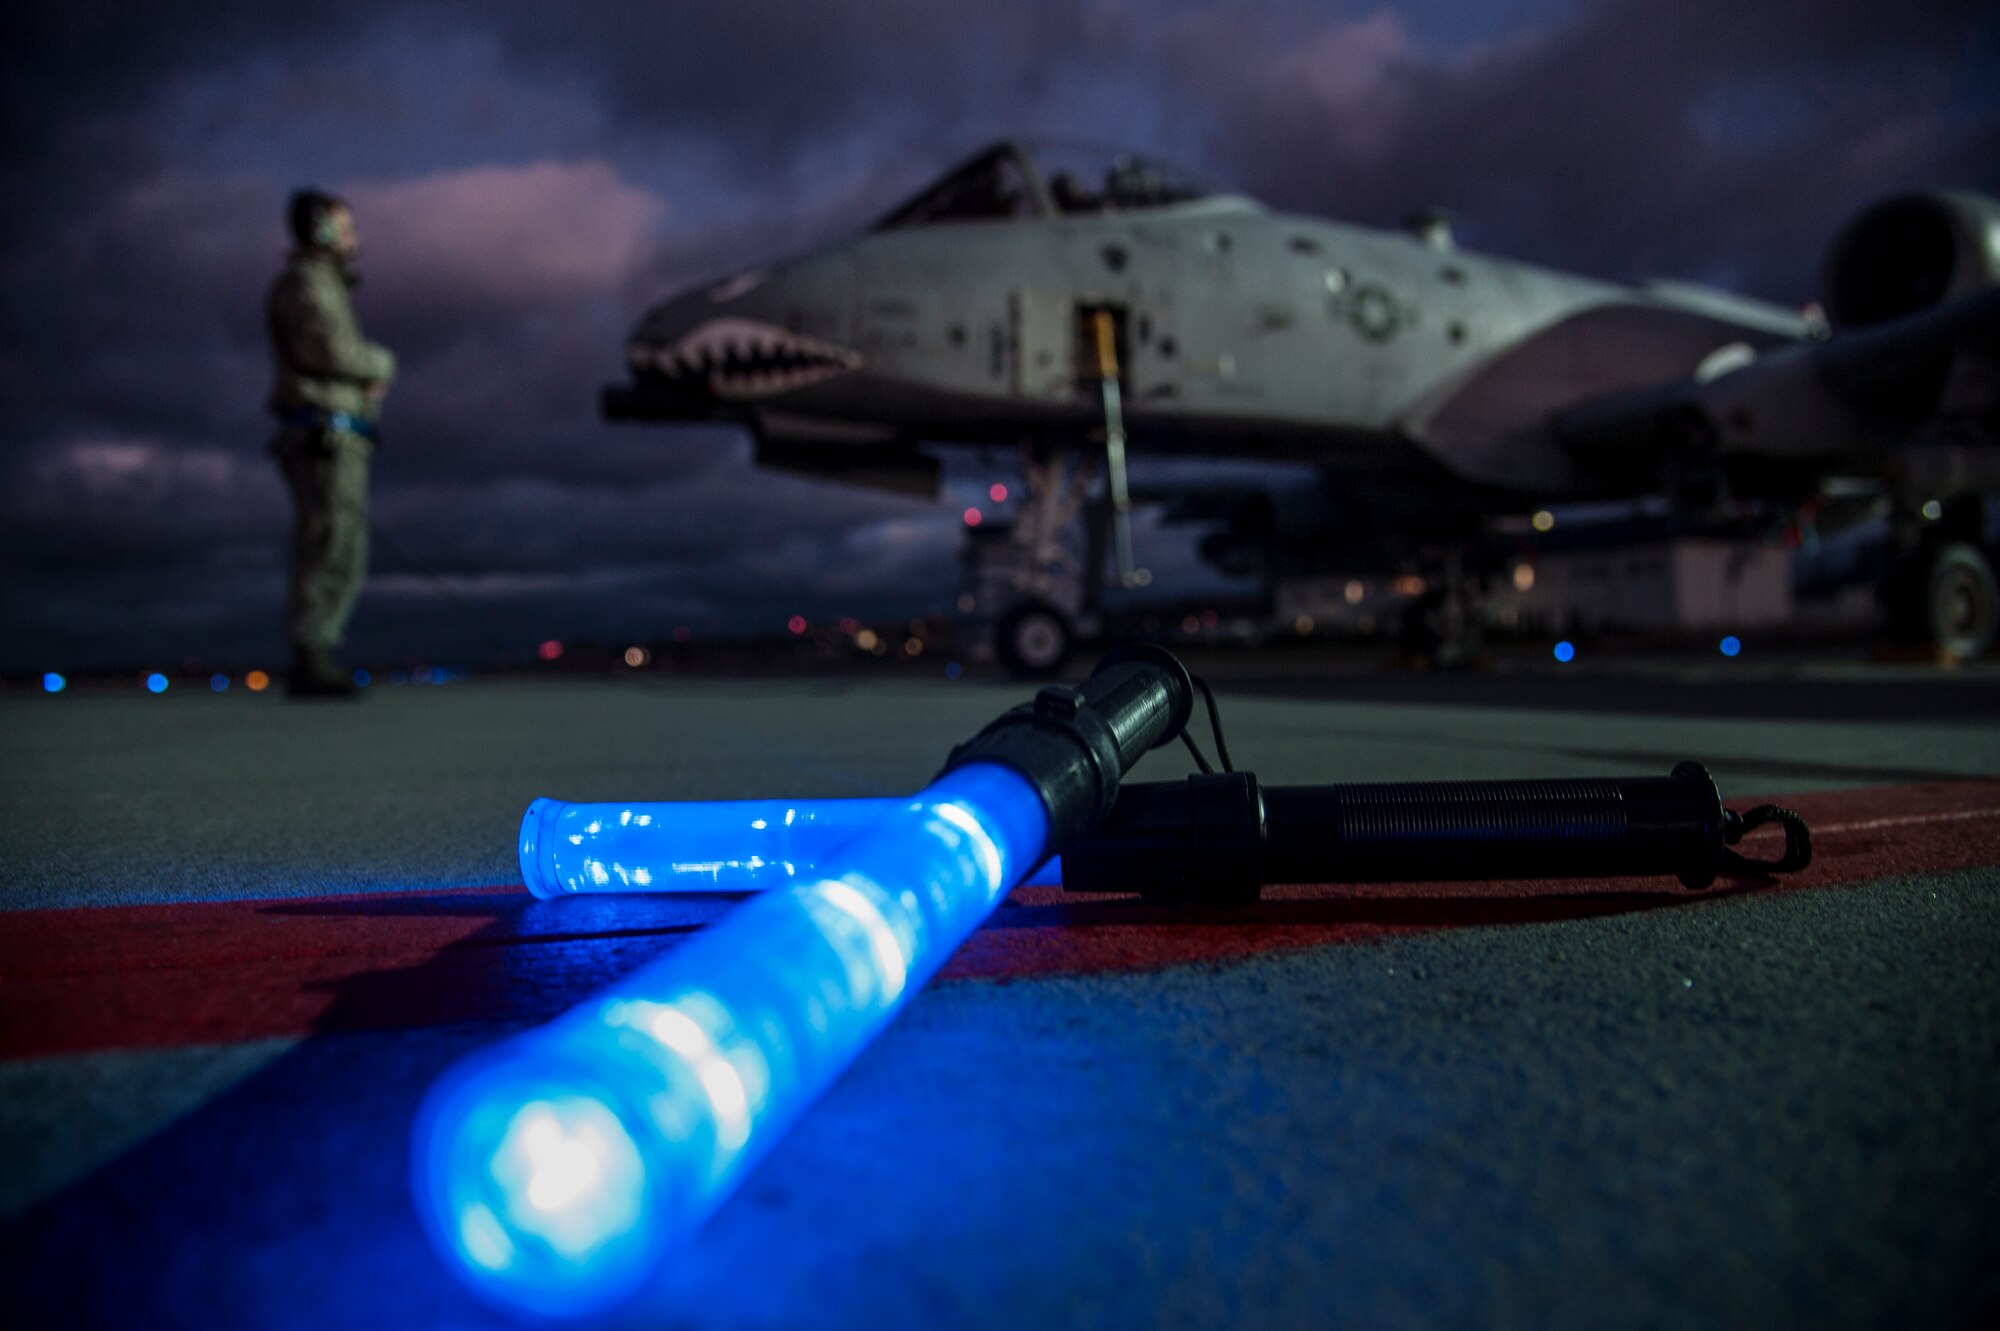 A pair of marshaling light wands sit on the flightline while U.S. Air Force Airman 1st Class Tony Nagel, 74th Expeditionary Fighter Squadron crew chief, communicates with Capt. Matt Mecadon, 74th EFS A-10 Thunderbolt II attack aircraft pilot, during pre-flight inspections on the flightline, Nov. 11, 2015, at Amari Air Base, Estonia.  The light wands assist in marshaling aircraft in low-light scenarios. (U.S. Air Force photo by Andrea Jenkins/Released)